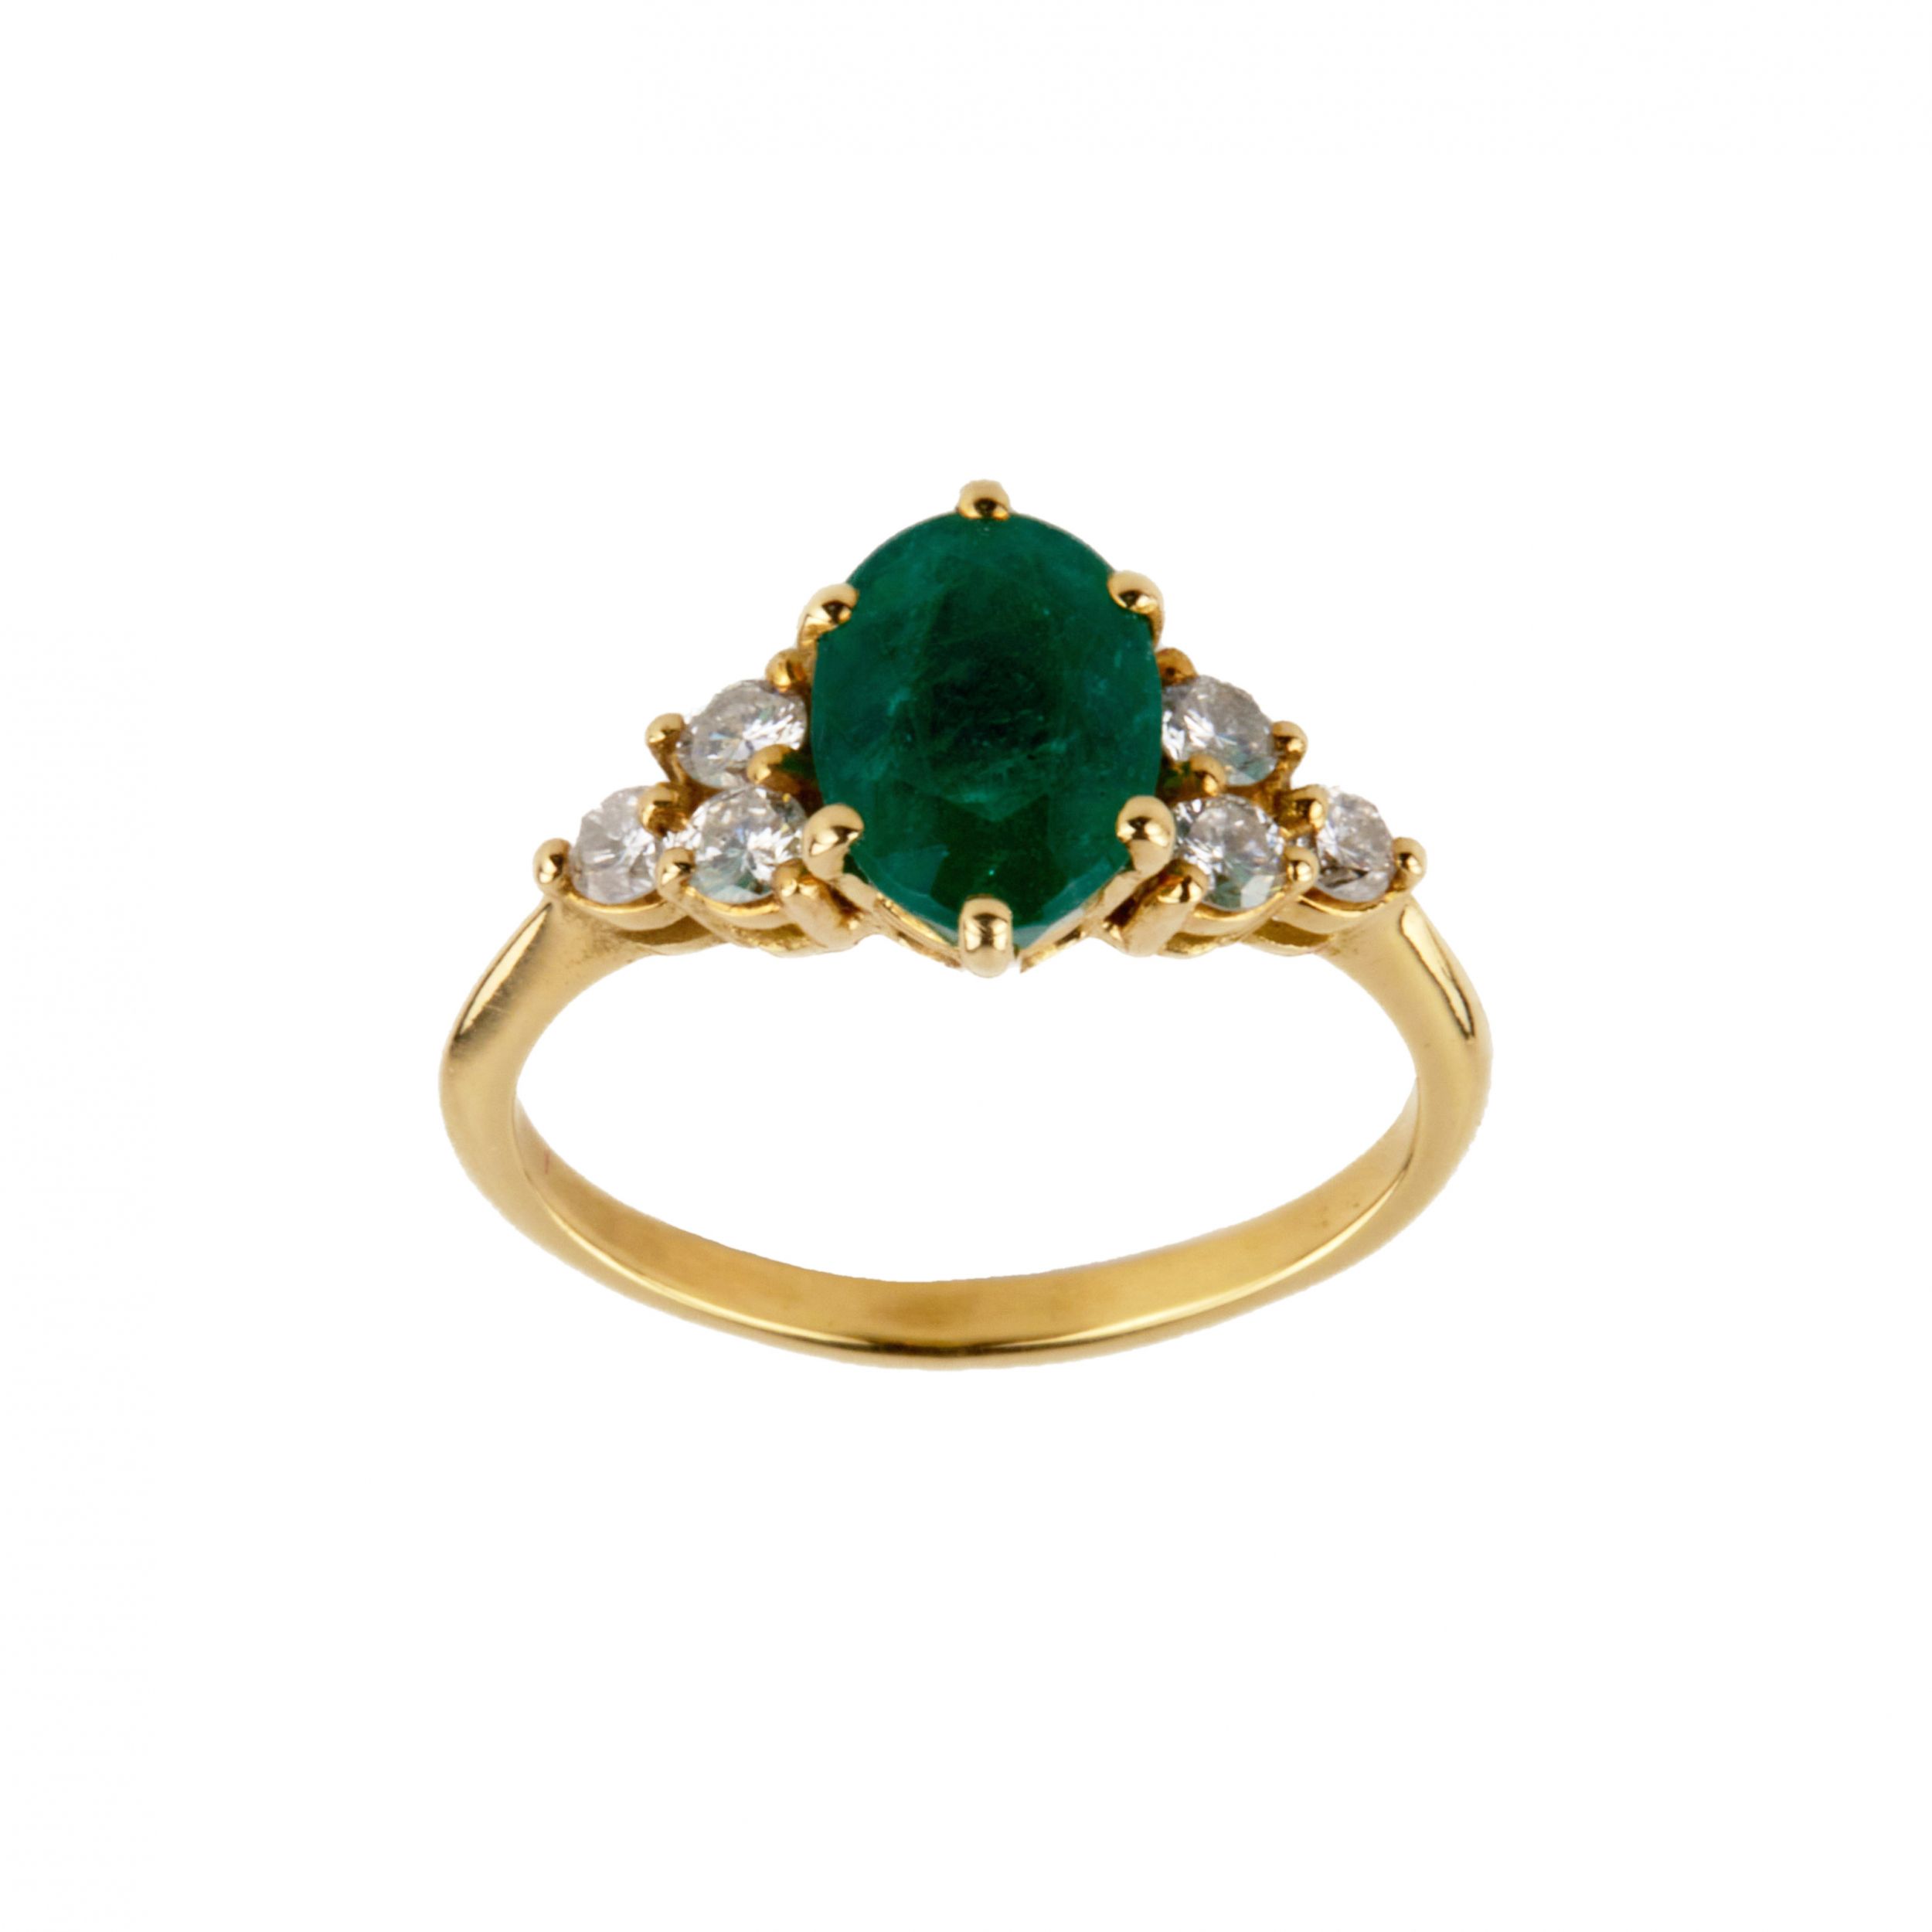 Gold ring with emerald and diamonds, classic design, total weight 3.10 gr. Colombian emerald 1.6 ct.